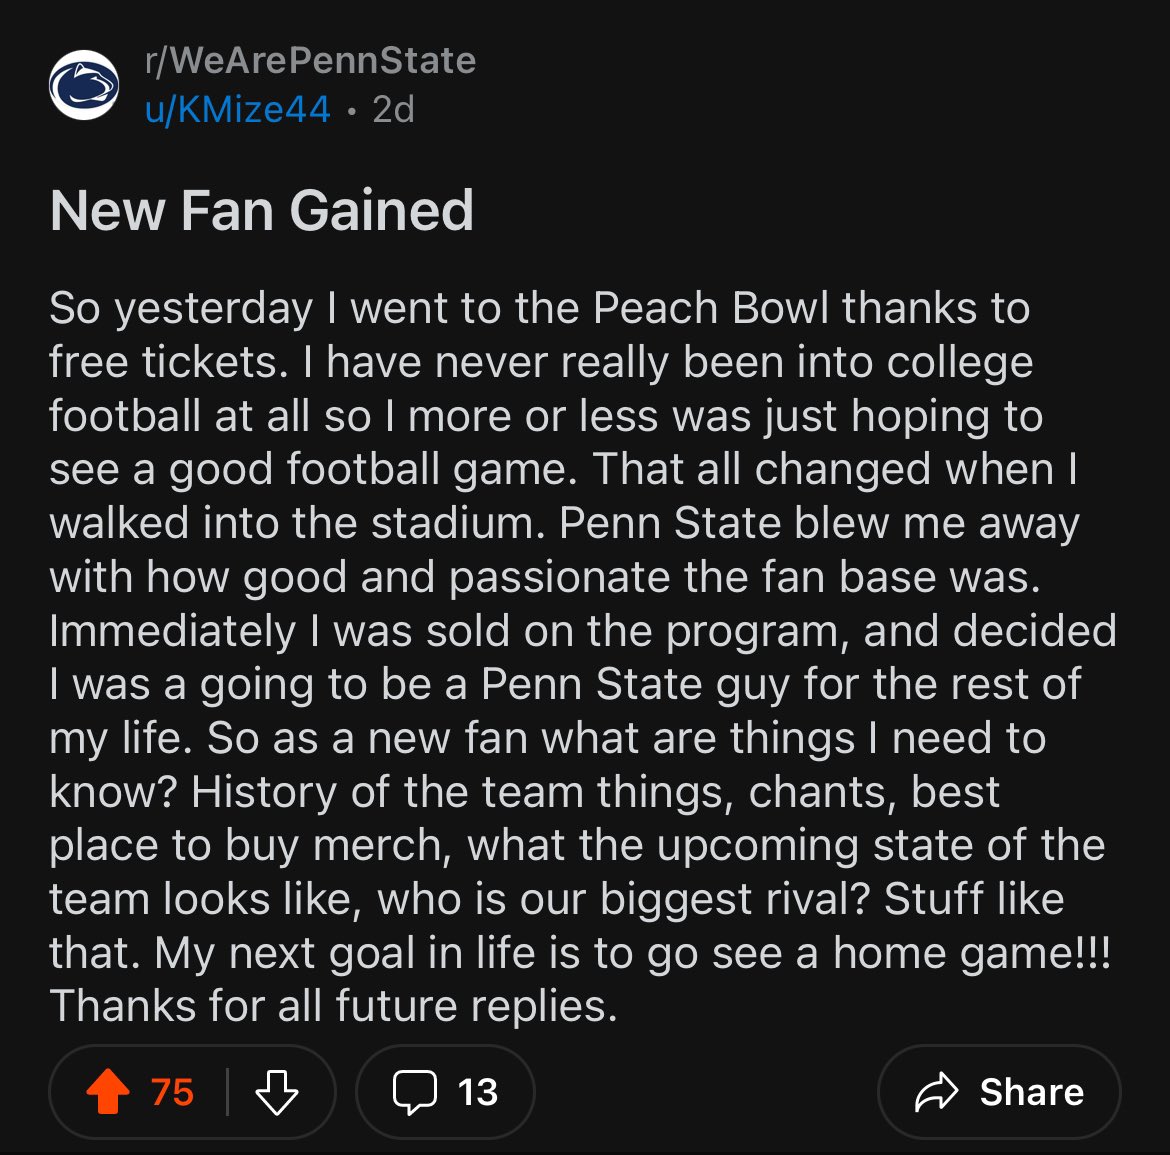 A wholesome post on r/WeArePennState from a user named KMize44. The user also mentions how he was sold on the team based on how positive and supportive the Penn State fan base was despite the performance.